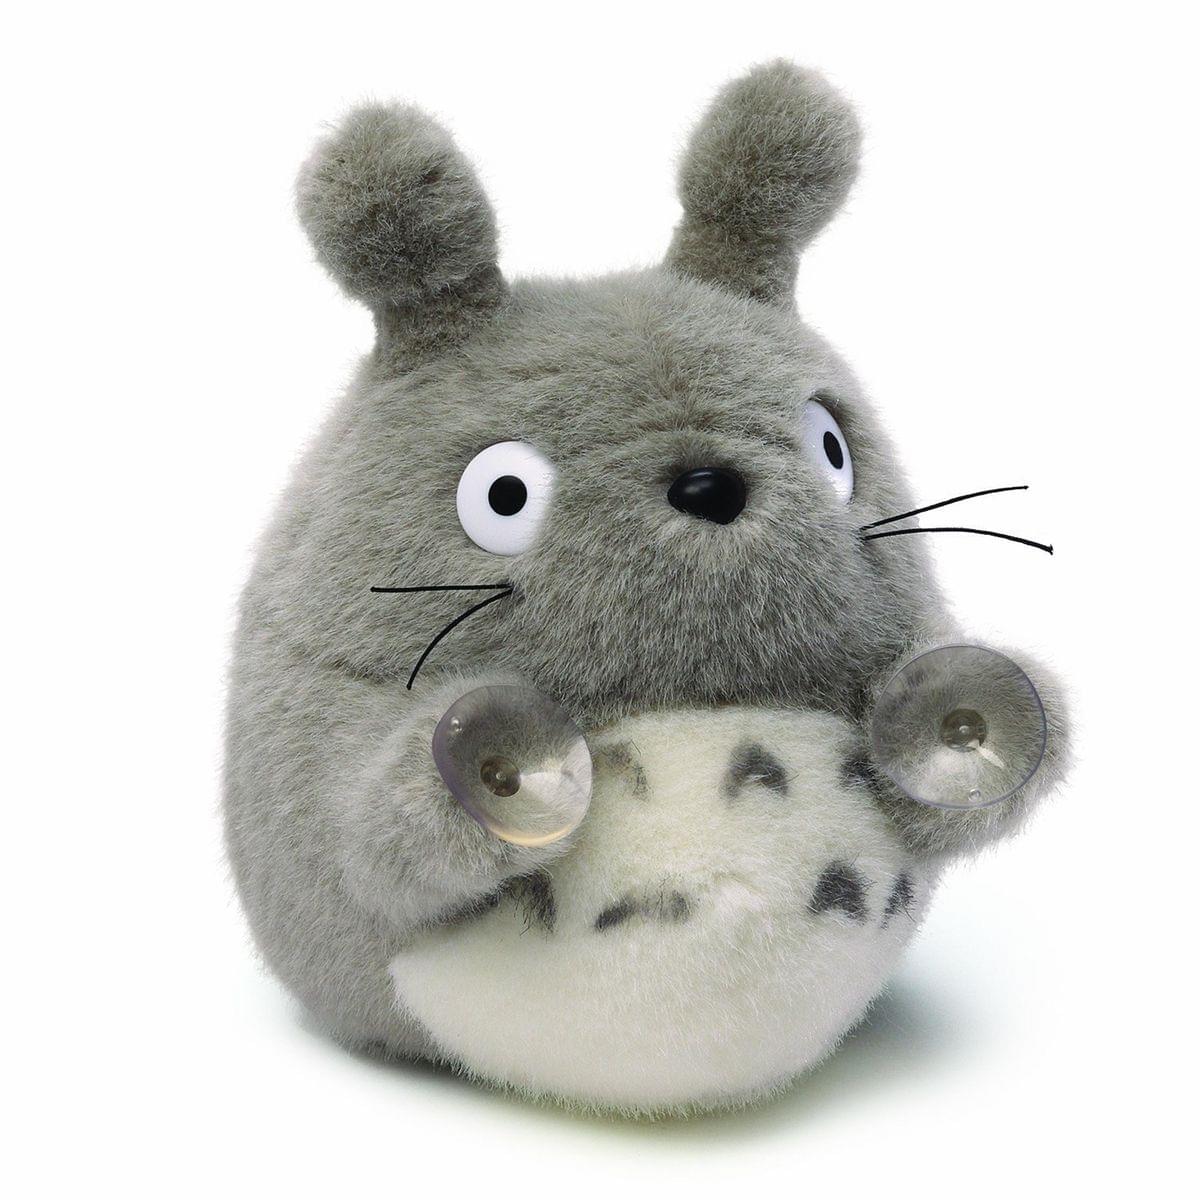 Totoro Plush With Suction Cups